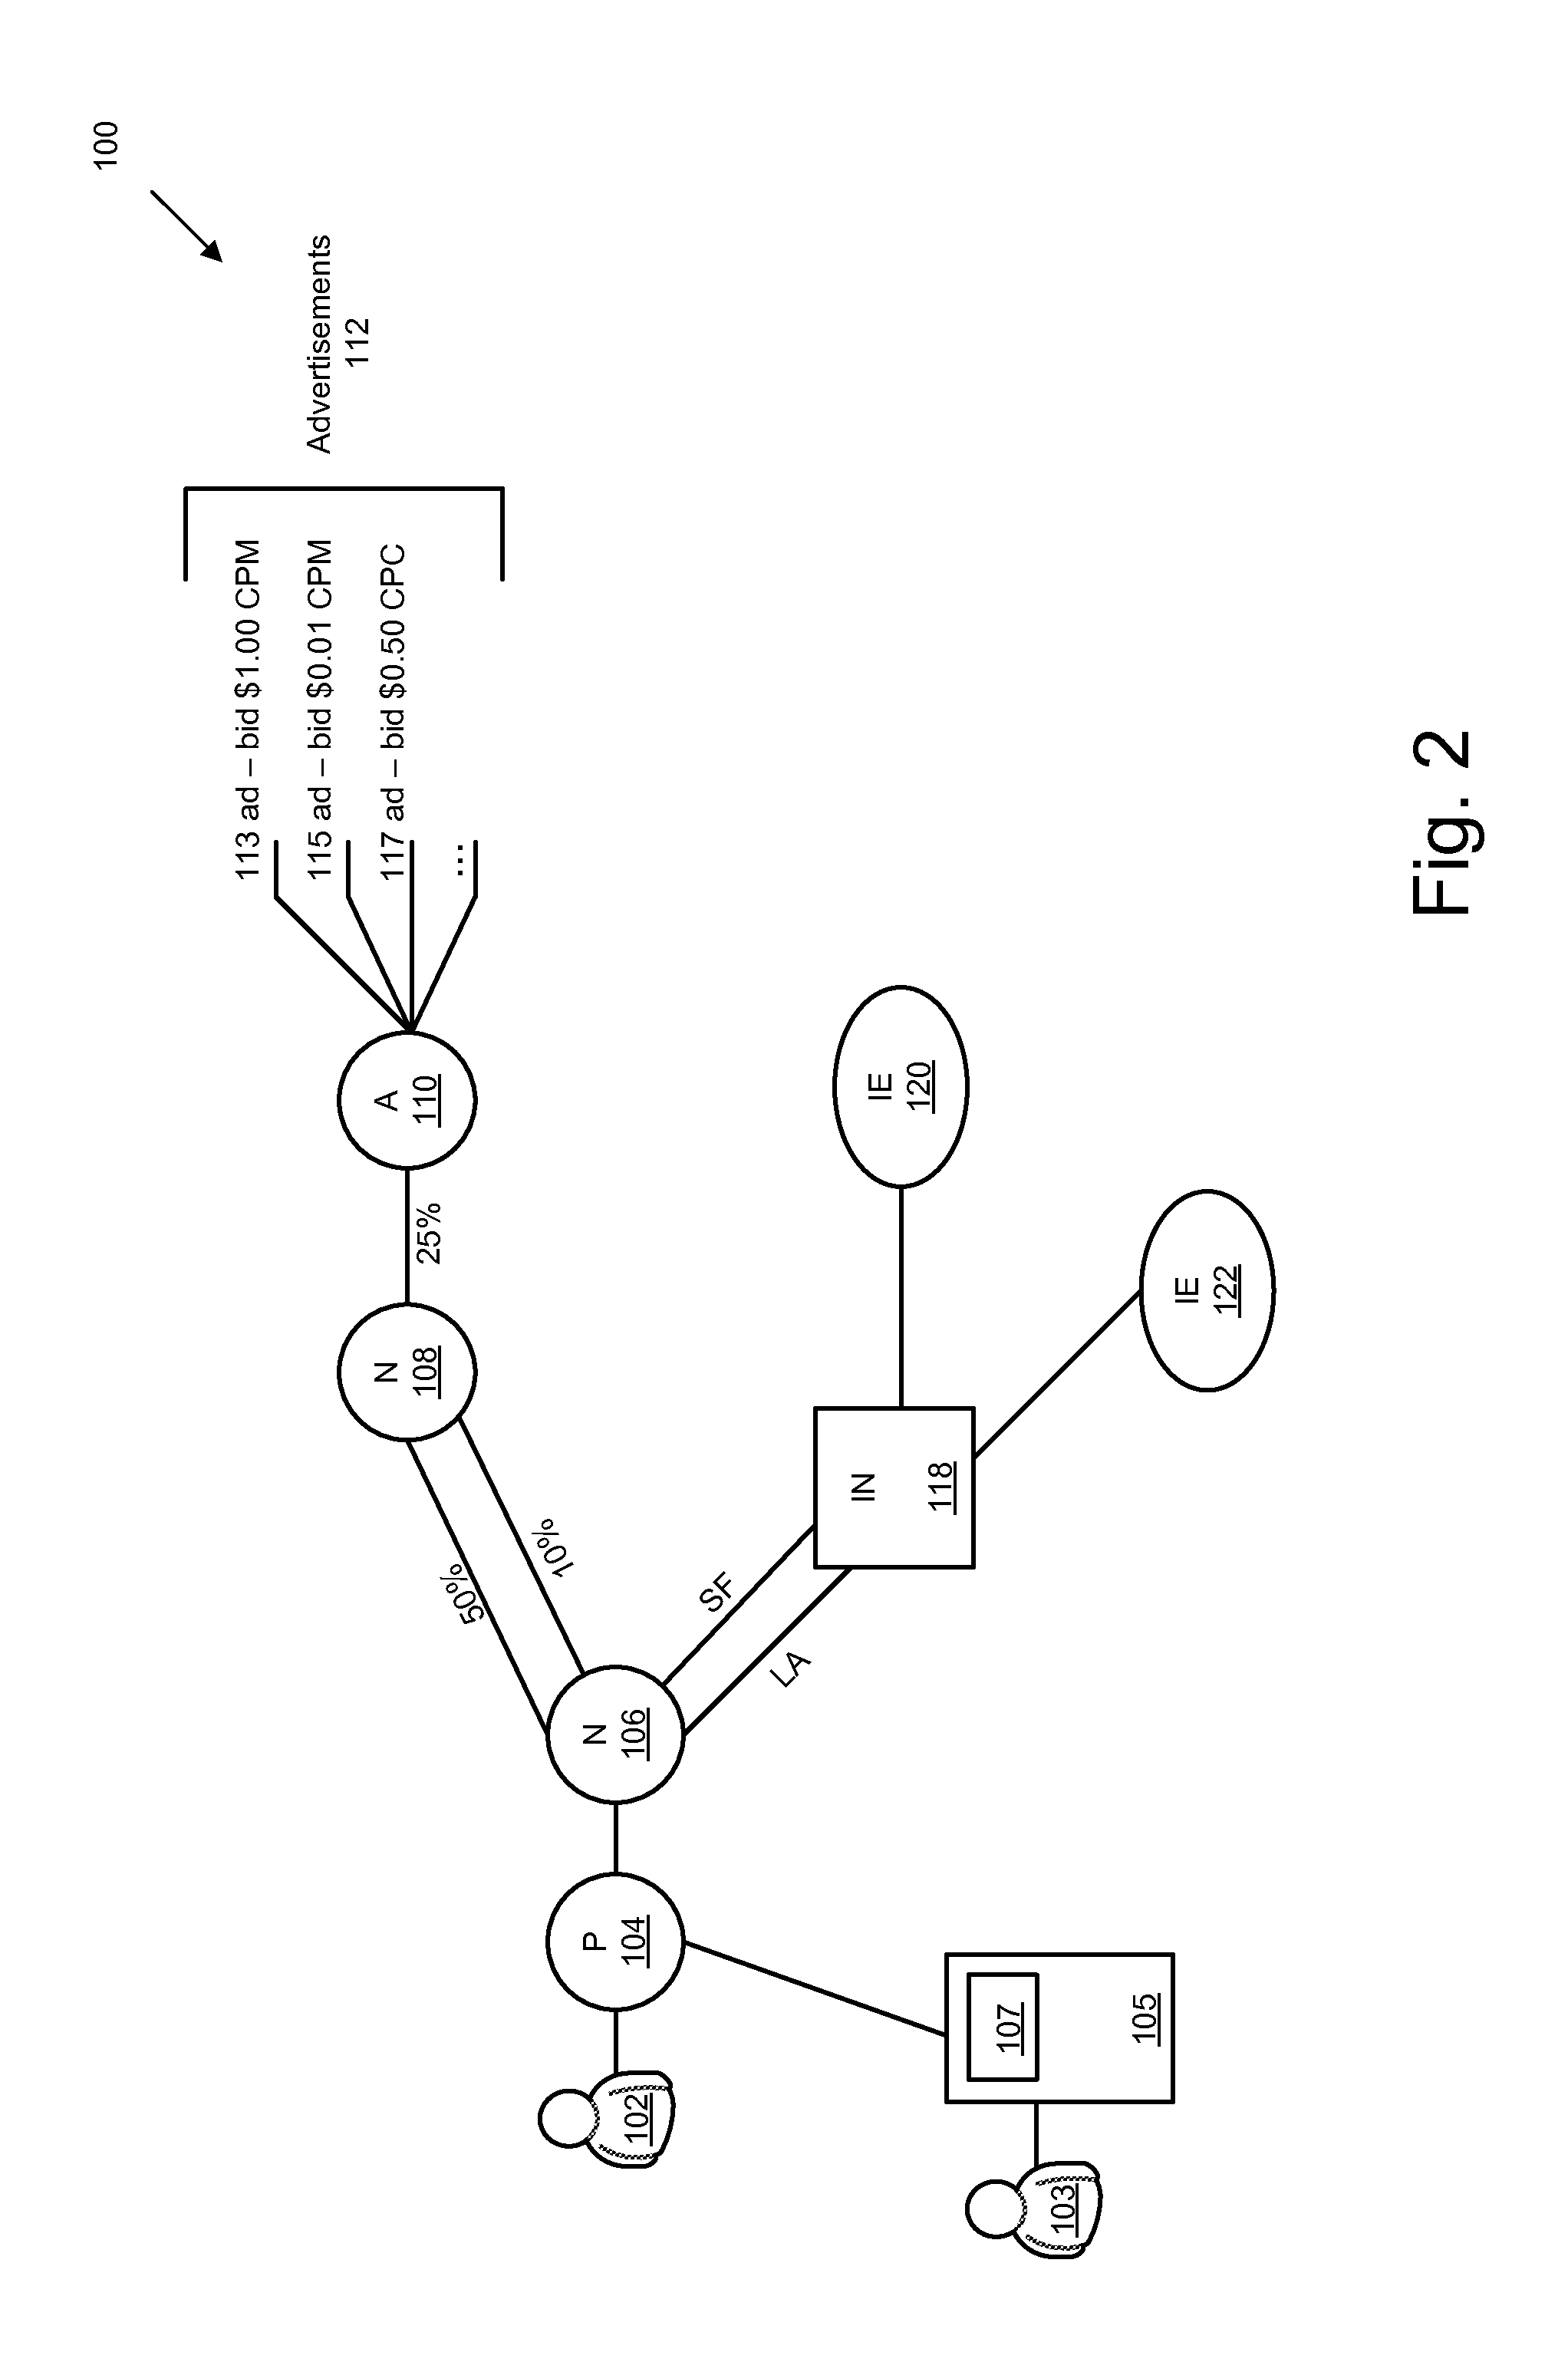 Method and system for formulating bids for internet advertising using forecast data